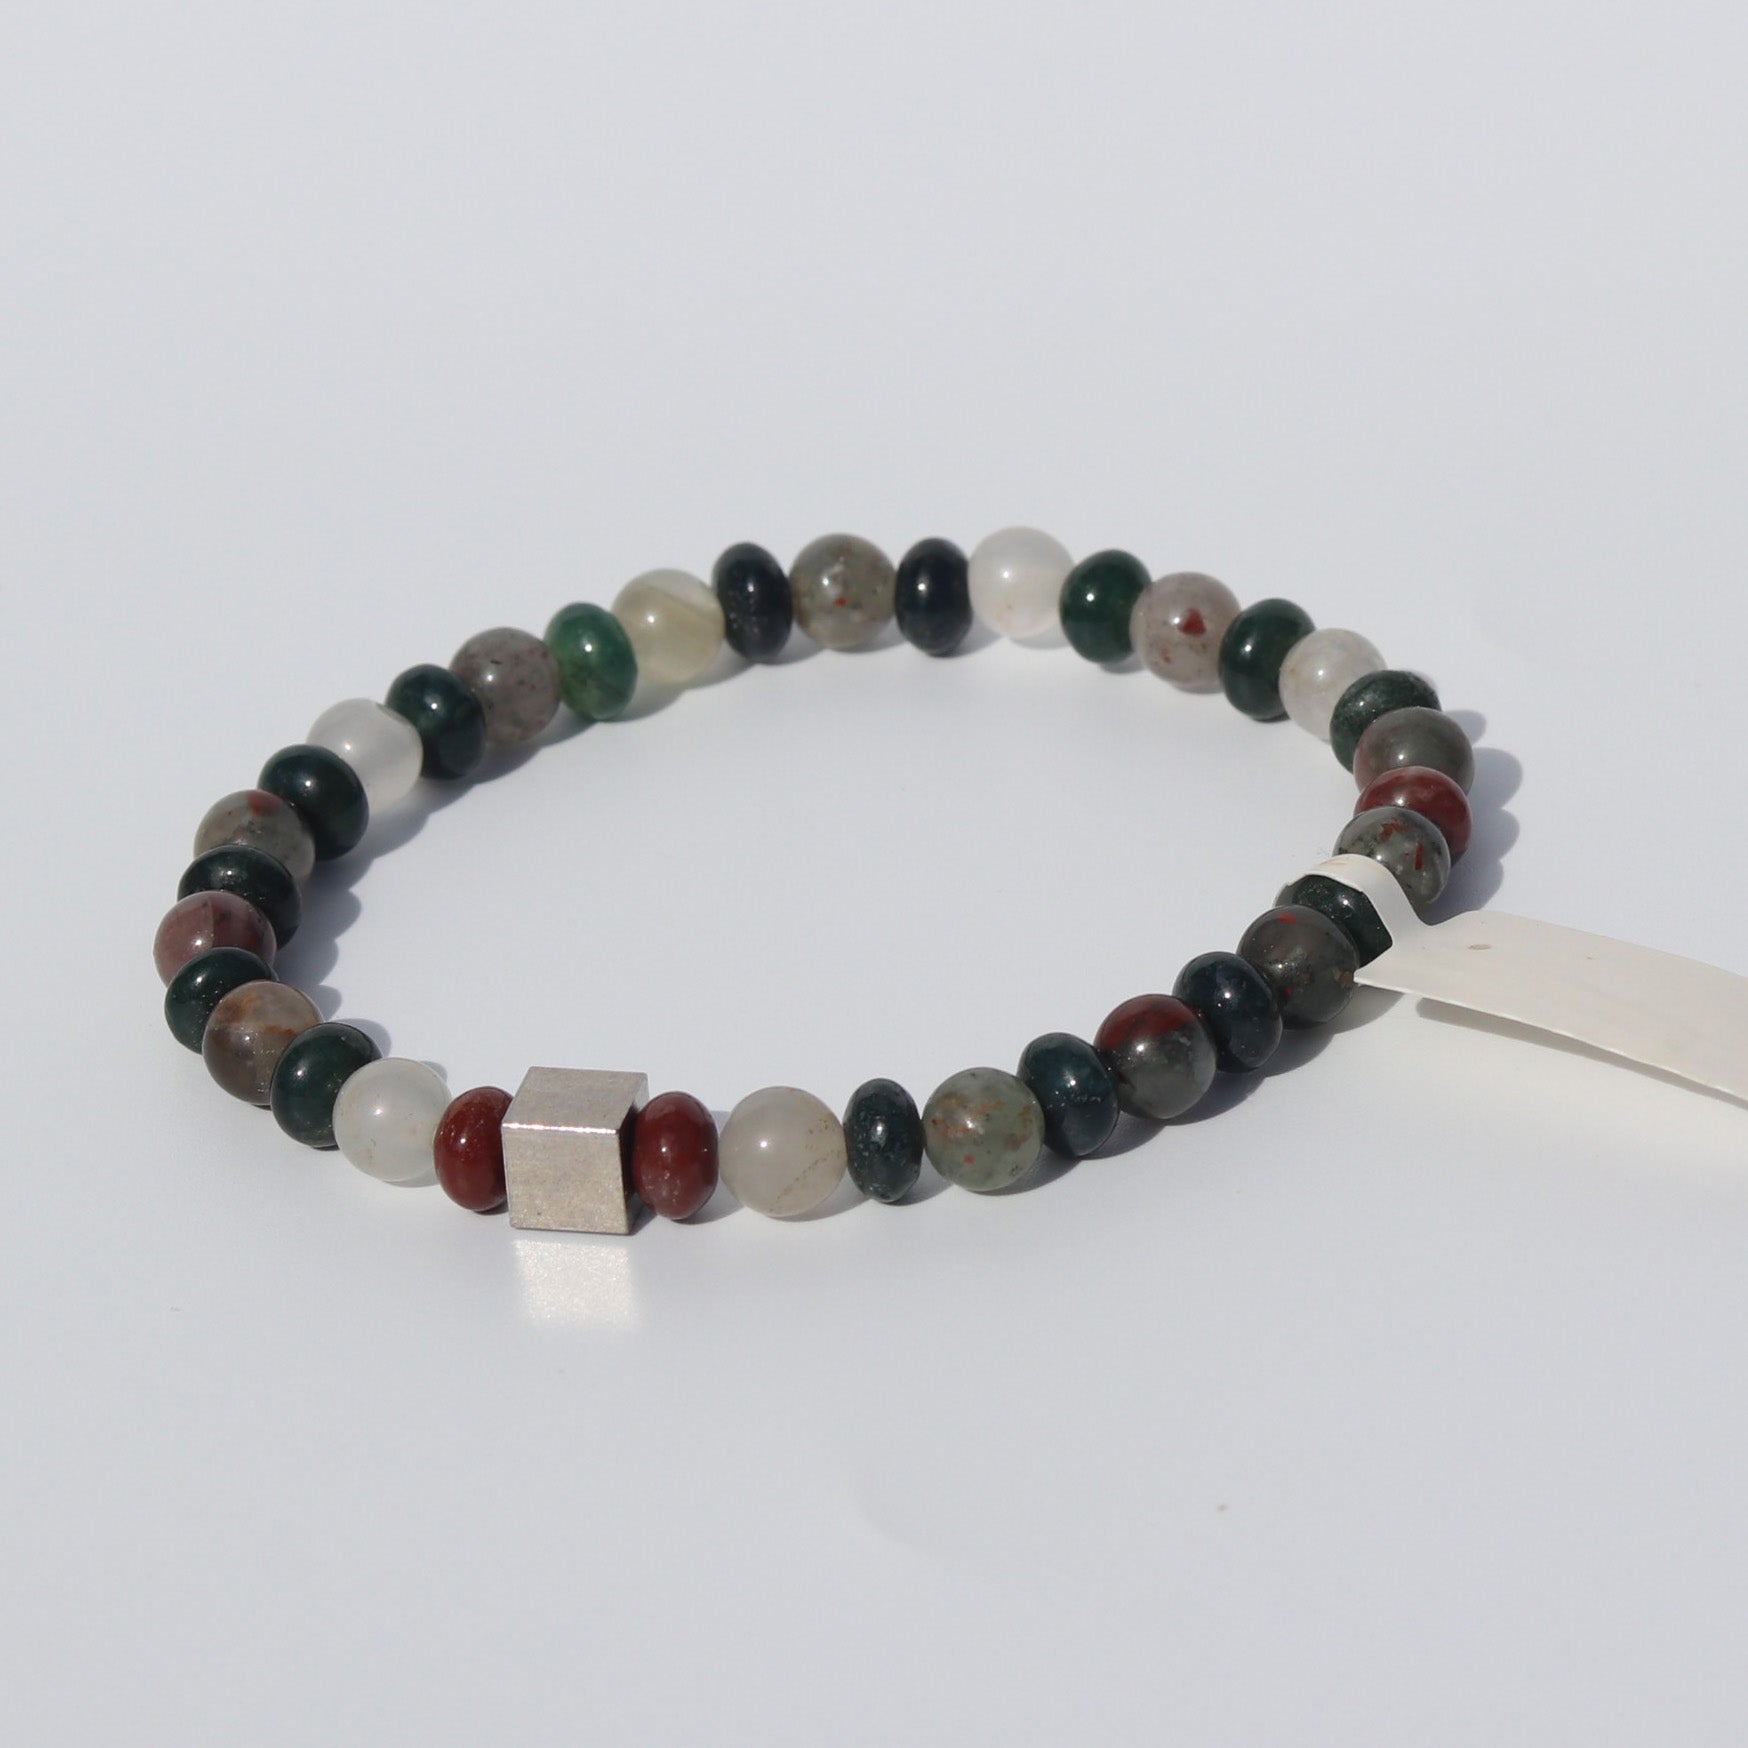 Bloodstone | Stretchy Cord Healing Crystal Bracelet with Silver Cube Spacer Beads | Choose Bead & Wrist Size | The Martyr's Stone